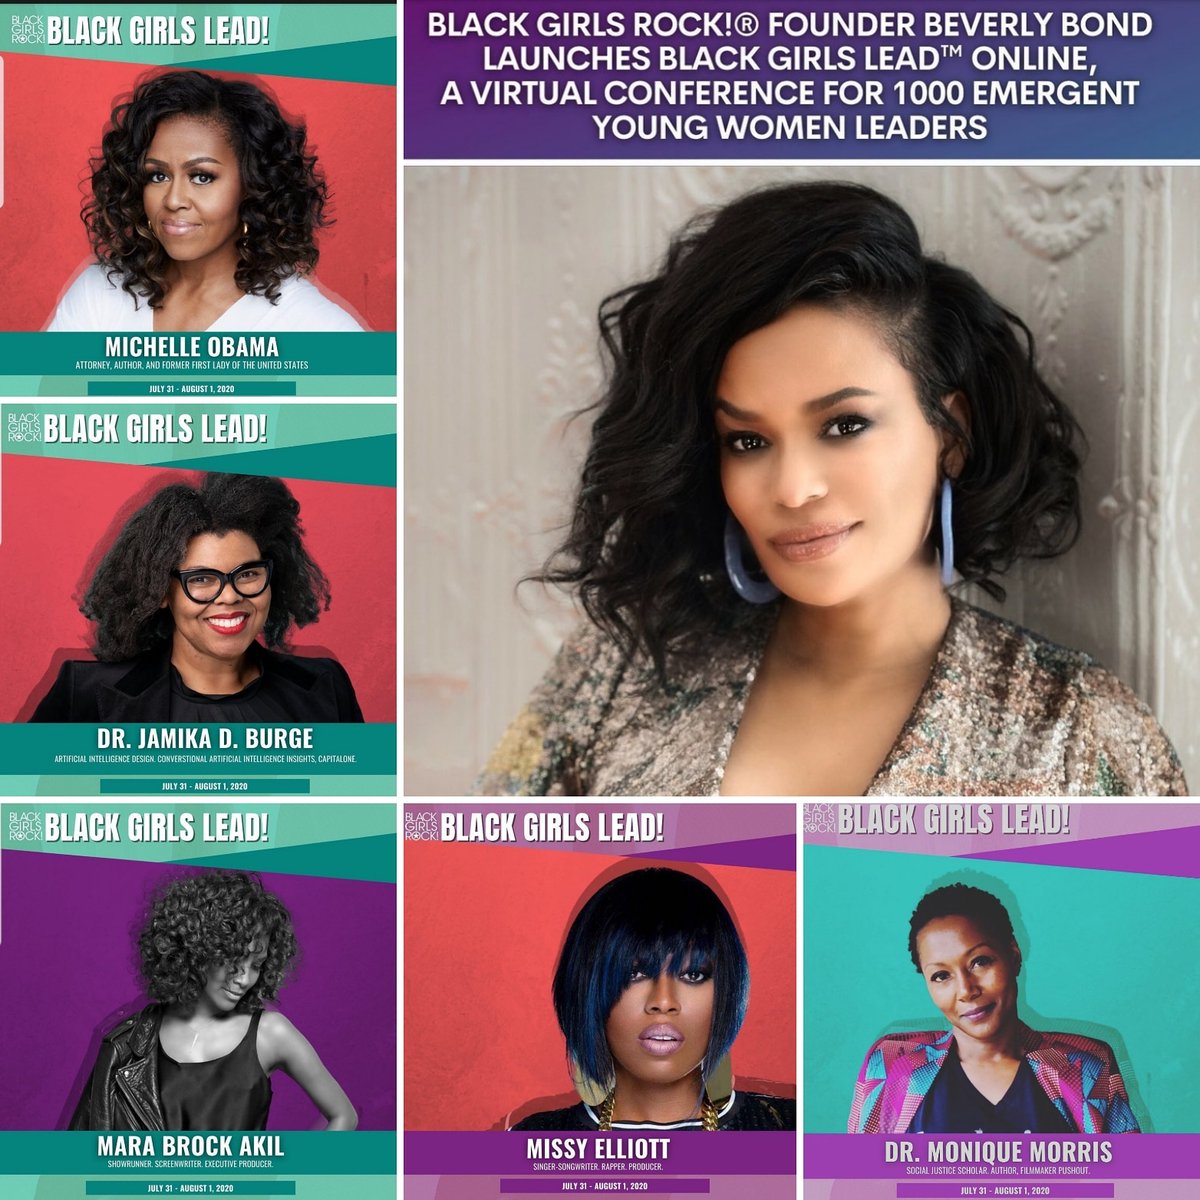 Am in amazing company, and looking forward to celebrating #BLACKGIRLSLEAD w/ @BEVERLYBOND + @BLACKGIRLSROCK, and 1000 emerging leaders! Applications are open a few more days...encourage your girls to apply: lead.blackgirlsrock.com 🙏🏿🔥